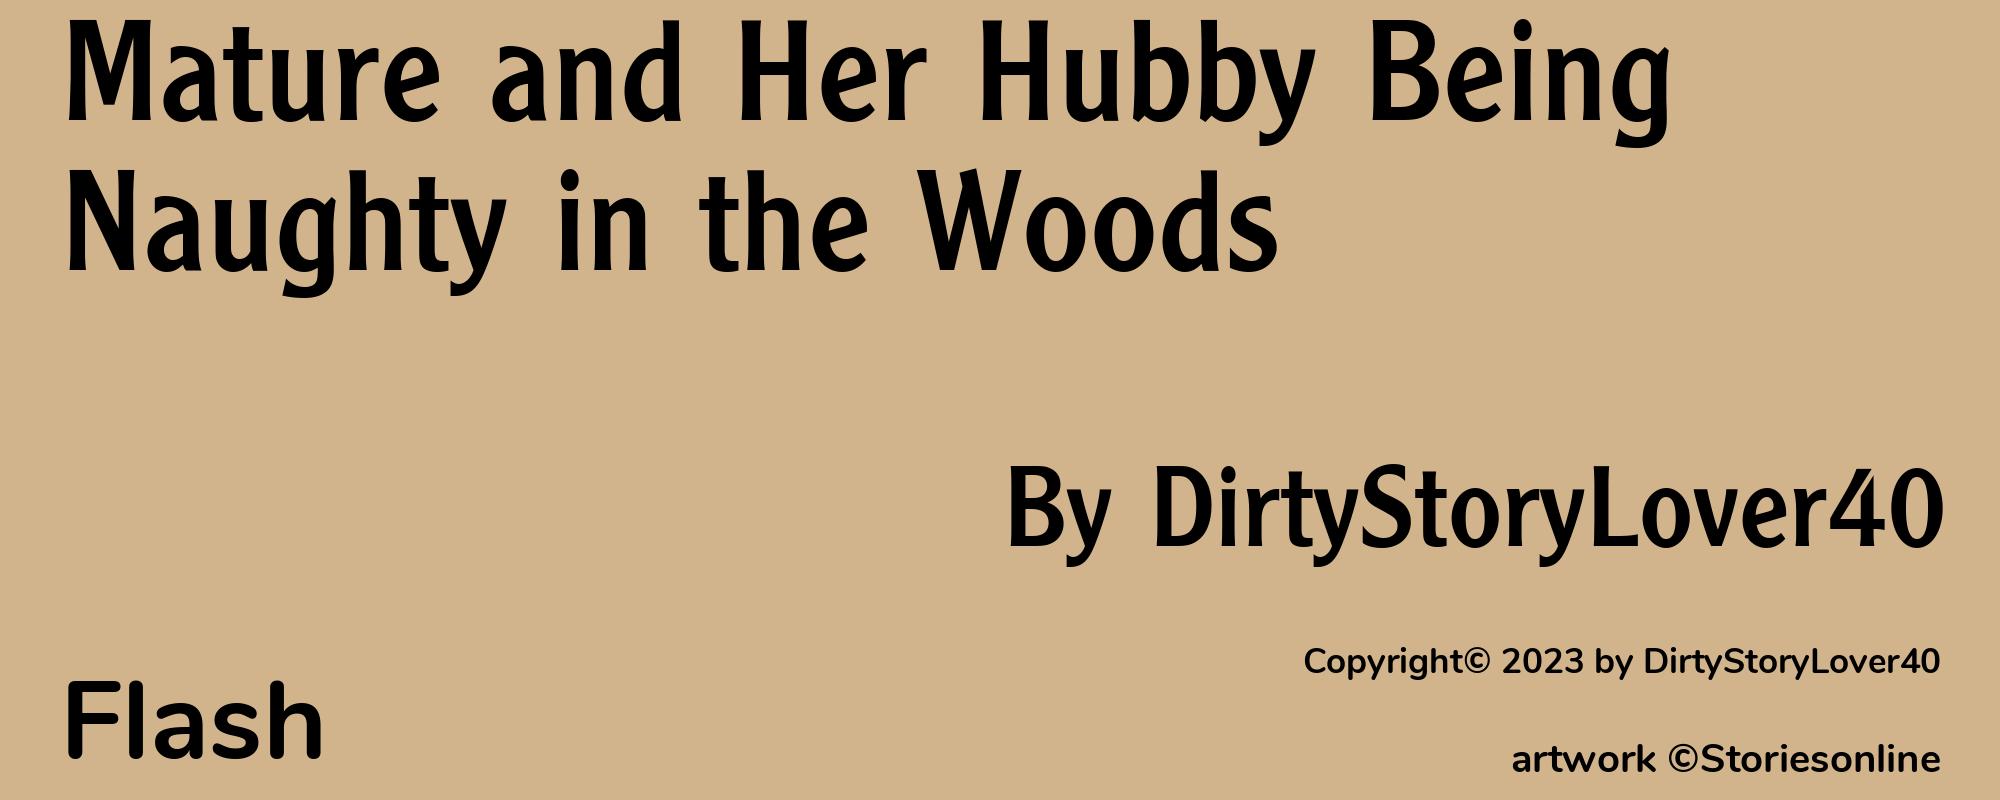 Mature and Her Hubby Being Naughty in the Woods - Cover